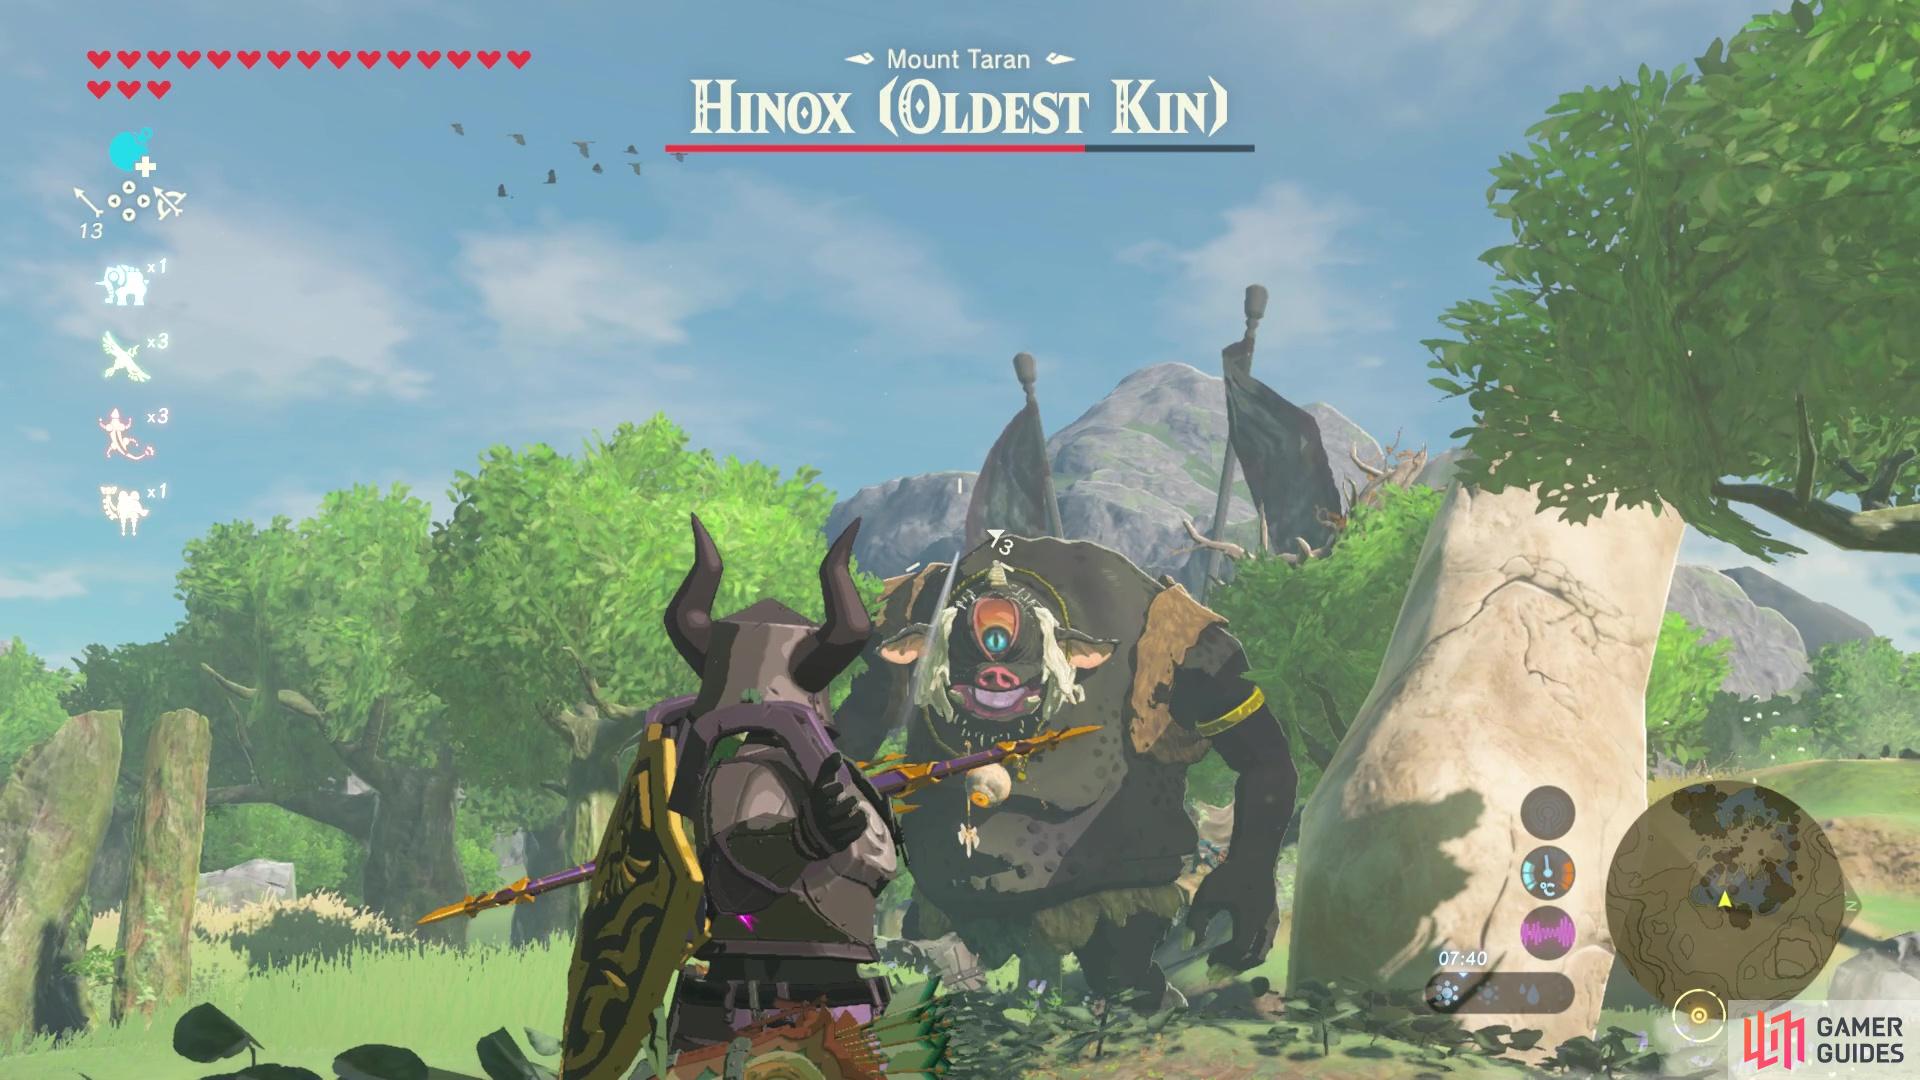 Shooting a Hinox in the eye will cause them to fall to the ground!